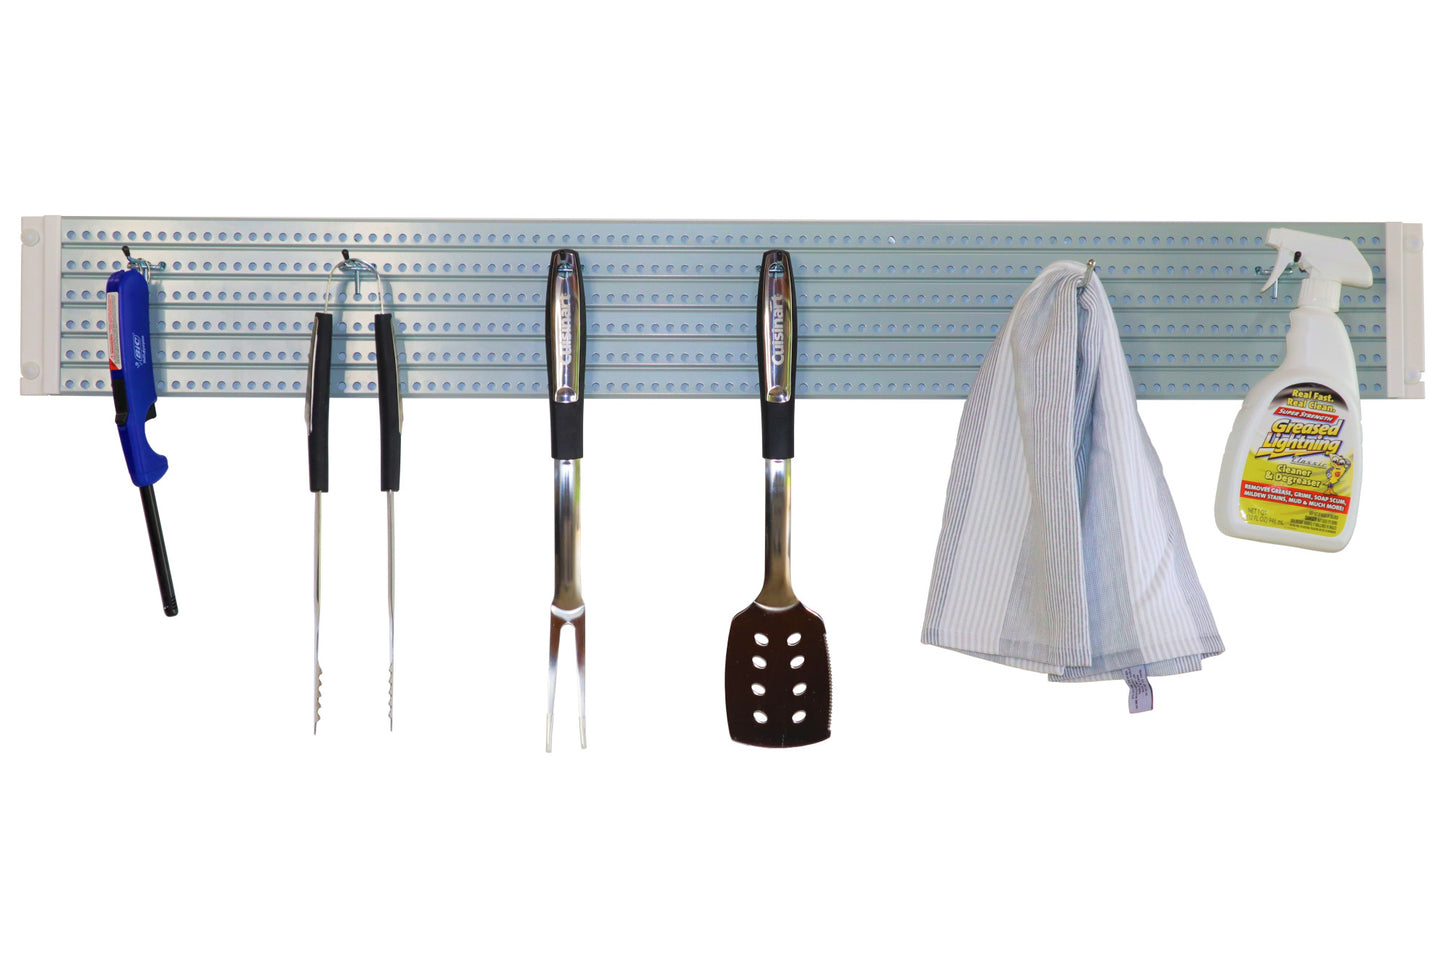 Image of a gray with white trim Handypeg pegboard with tools for grilling and cleaning hanging from attached pegs.